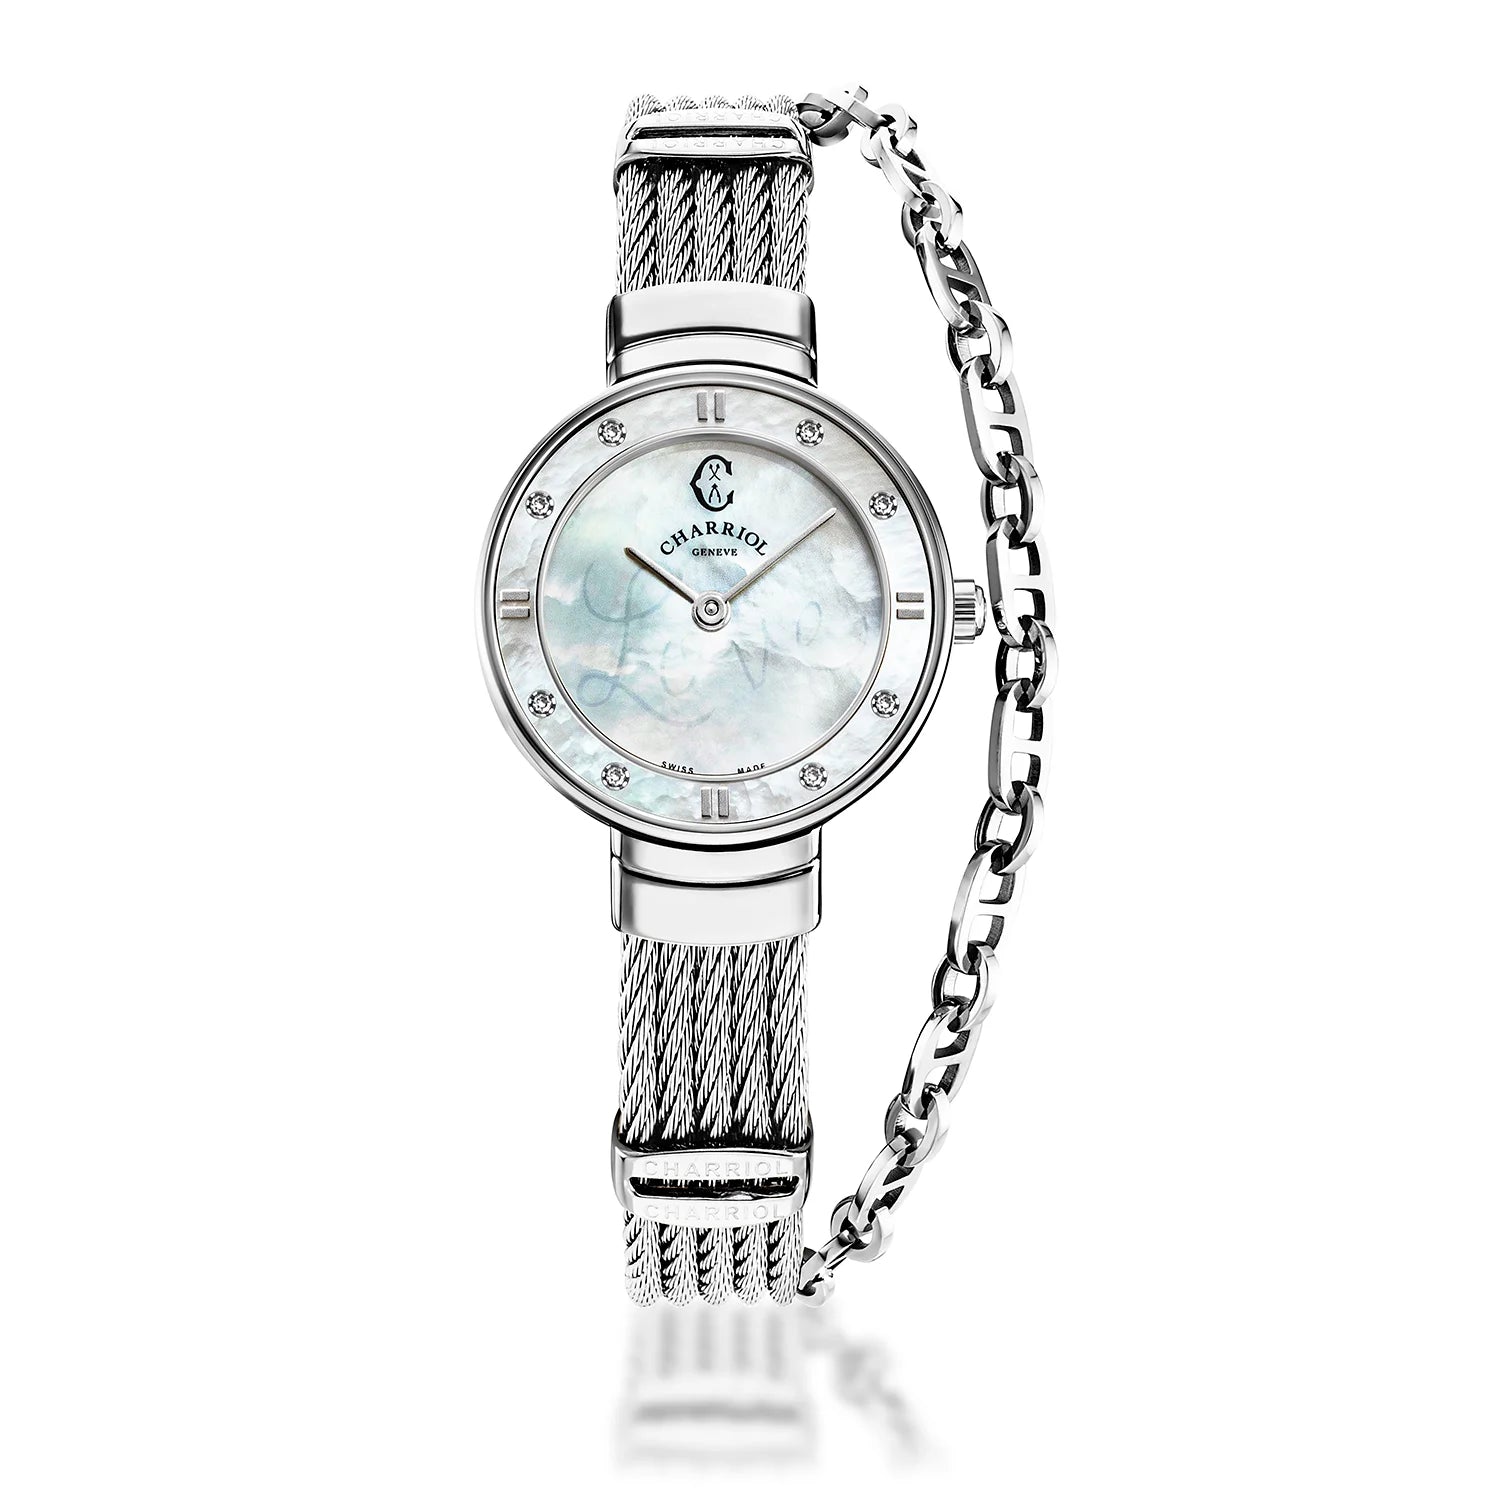 ST TROPEZ, 25MM, QUARTZ CALIBRE, WHITE MOTHER-OF-PEARL WITH LUMINESCENT "LOVE" DIAL, WHITE MOTHER-OF-PEARL WITH 8 DIAMONDS BEZEL, STEEL CABLE BRACELET - Charriol Geneve -  Watch